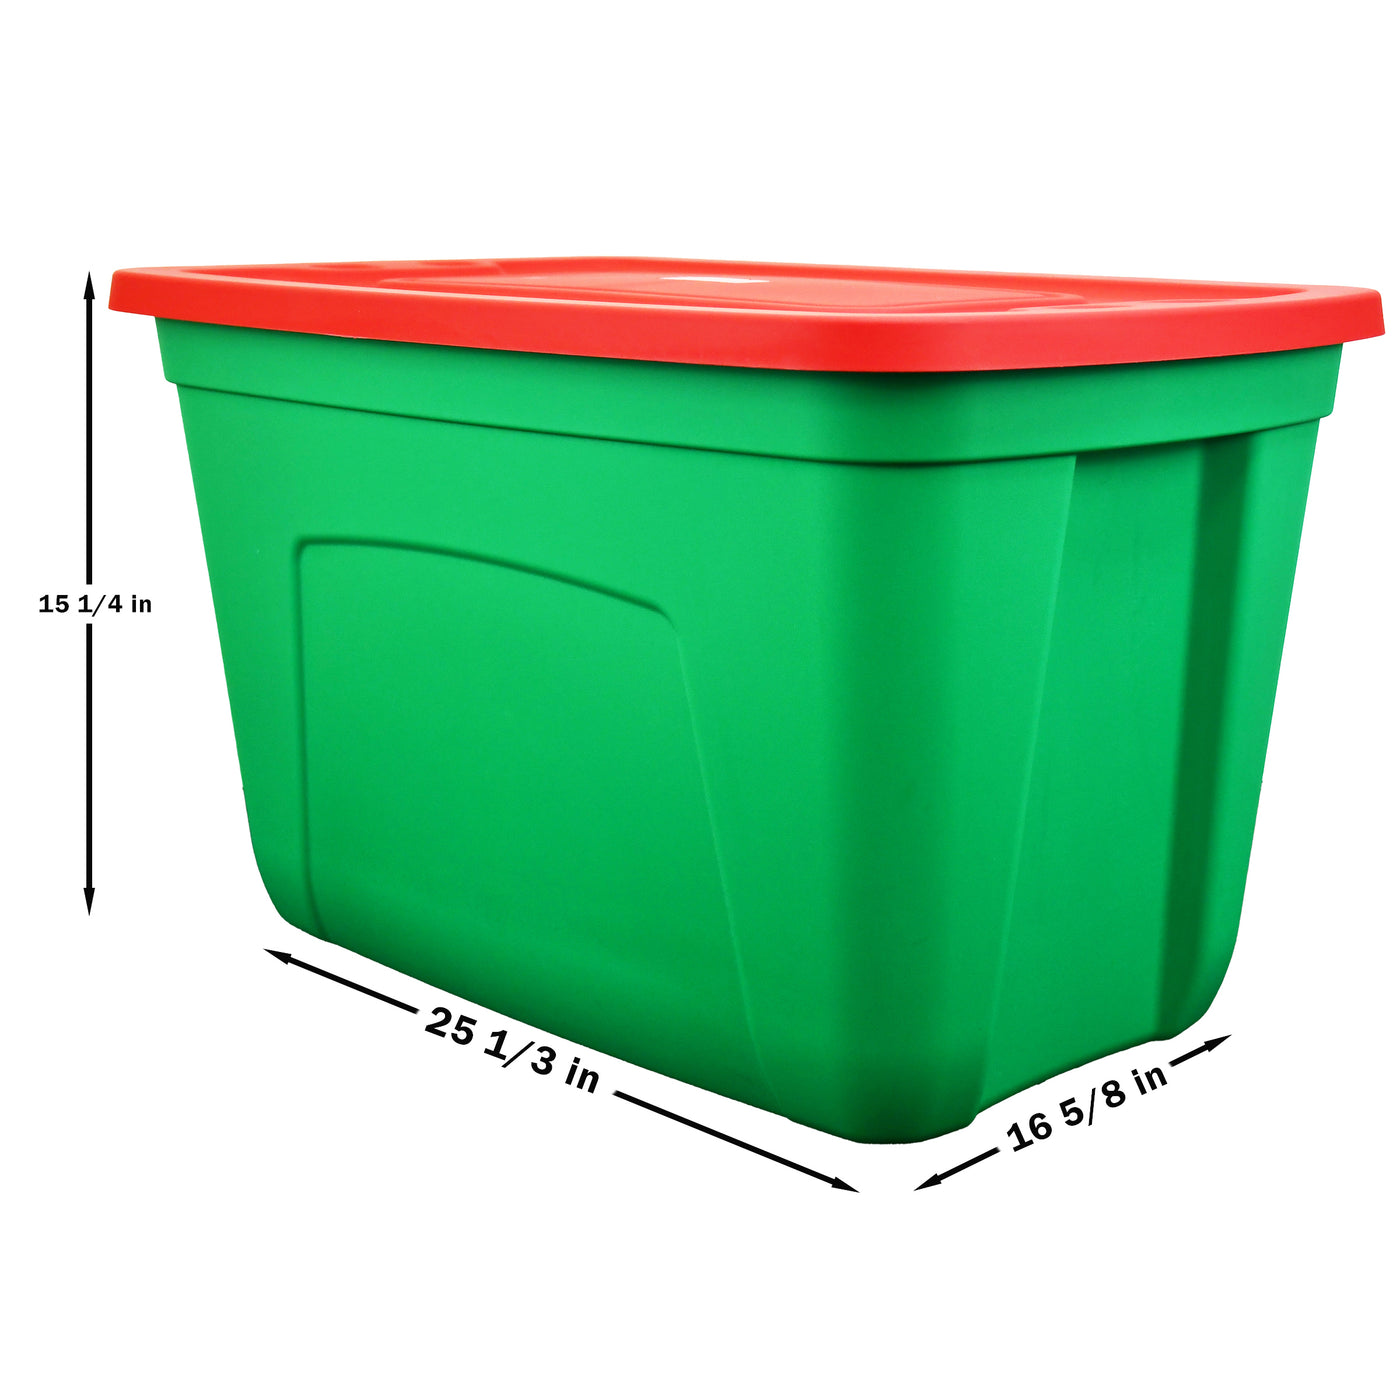 HOMZ 18 Gallon Heavy Duty Plastic Storage Container, Green/Red (4 Pack)